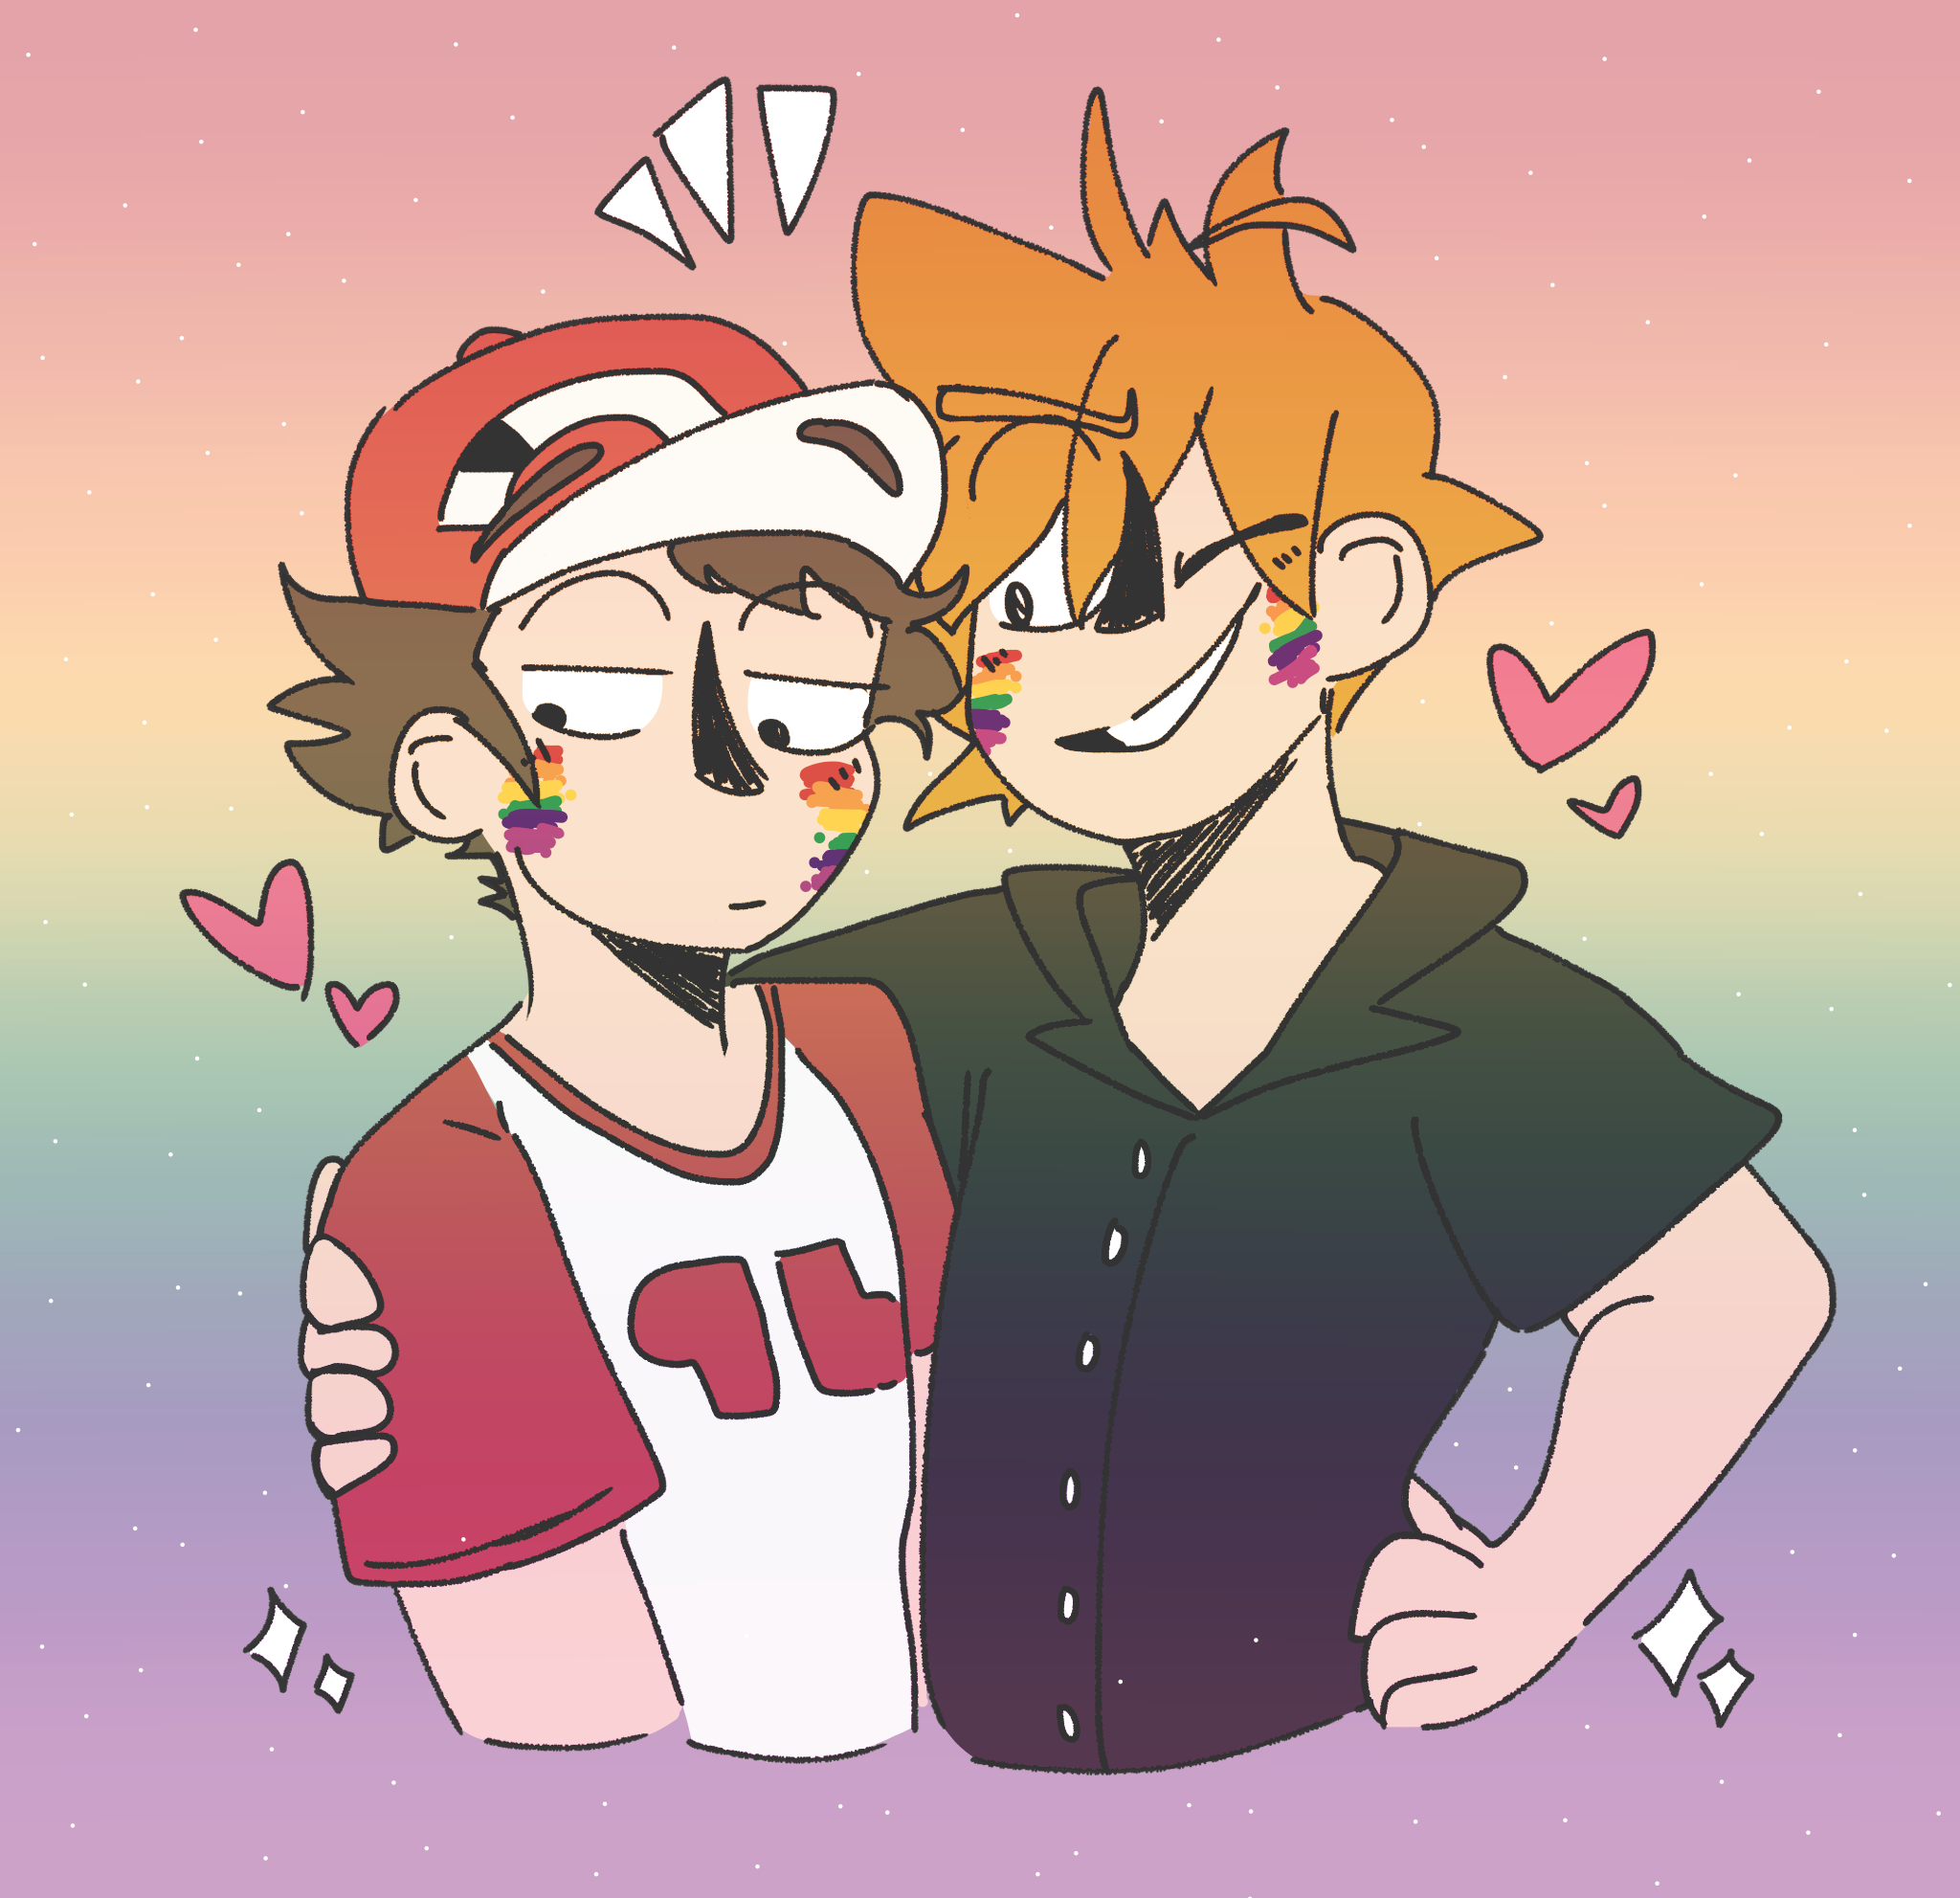 zerogravityhero:Poke Pride Day 21! Featuring the Original Boys, Red and Blue! 🌈